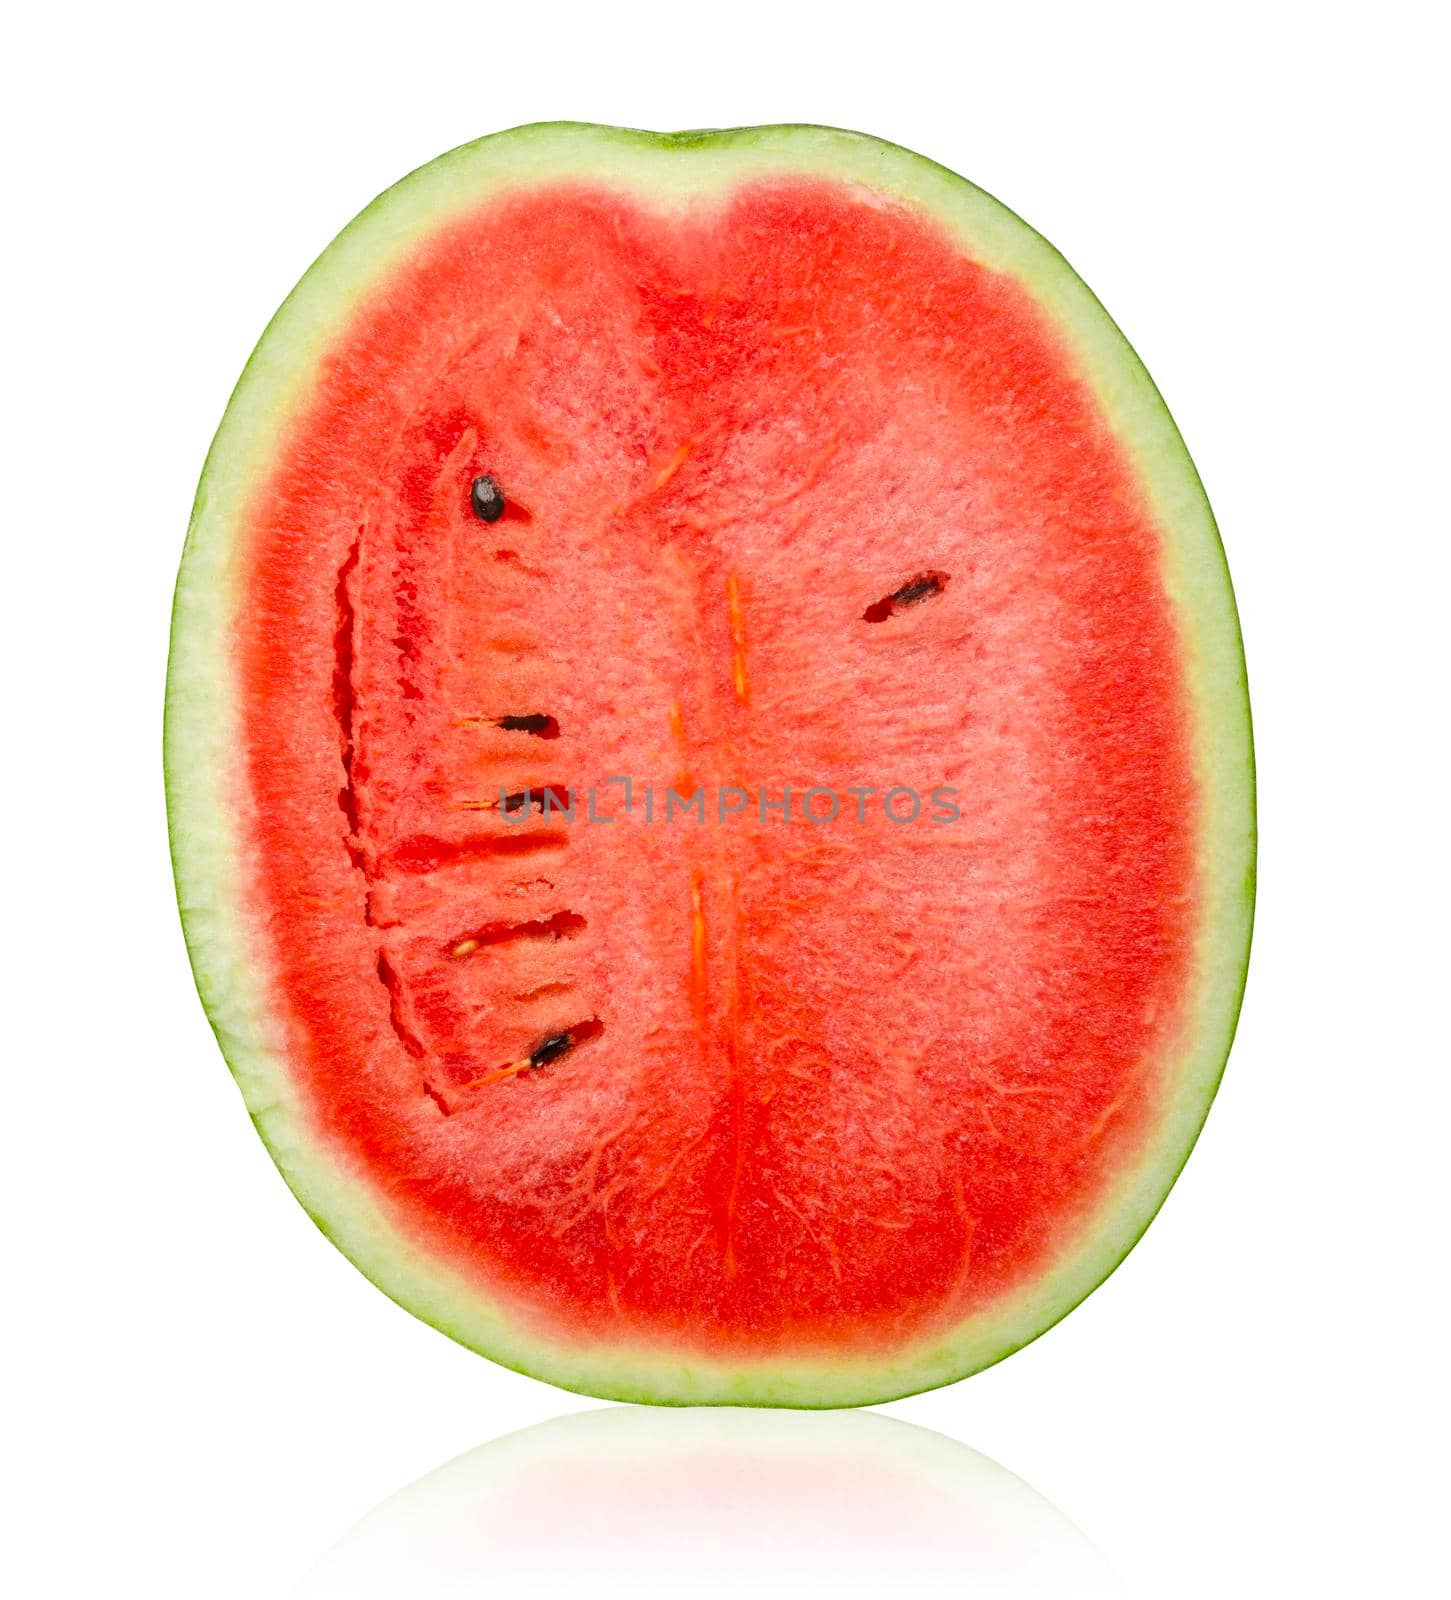 Watermelon red fruit isolated on white background. by Gamjai